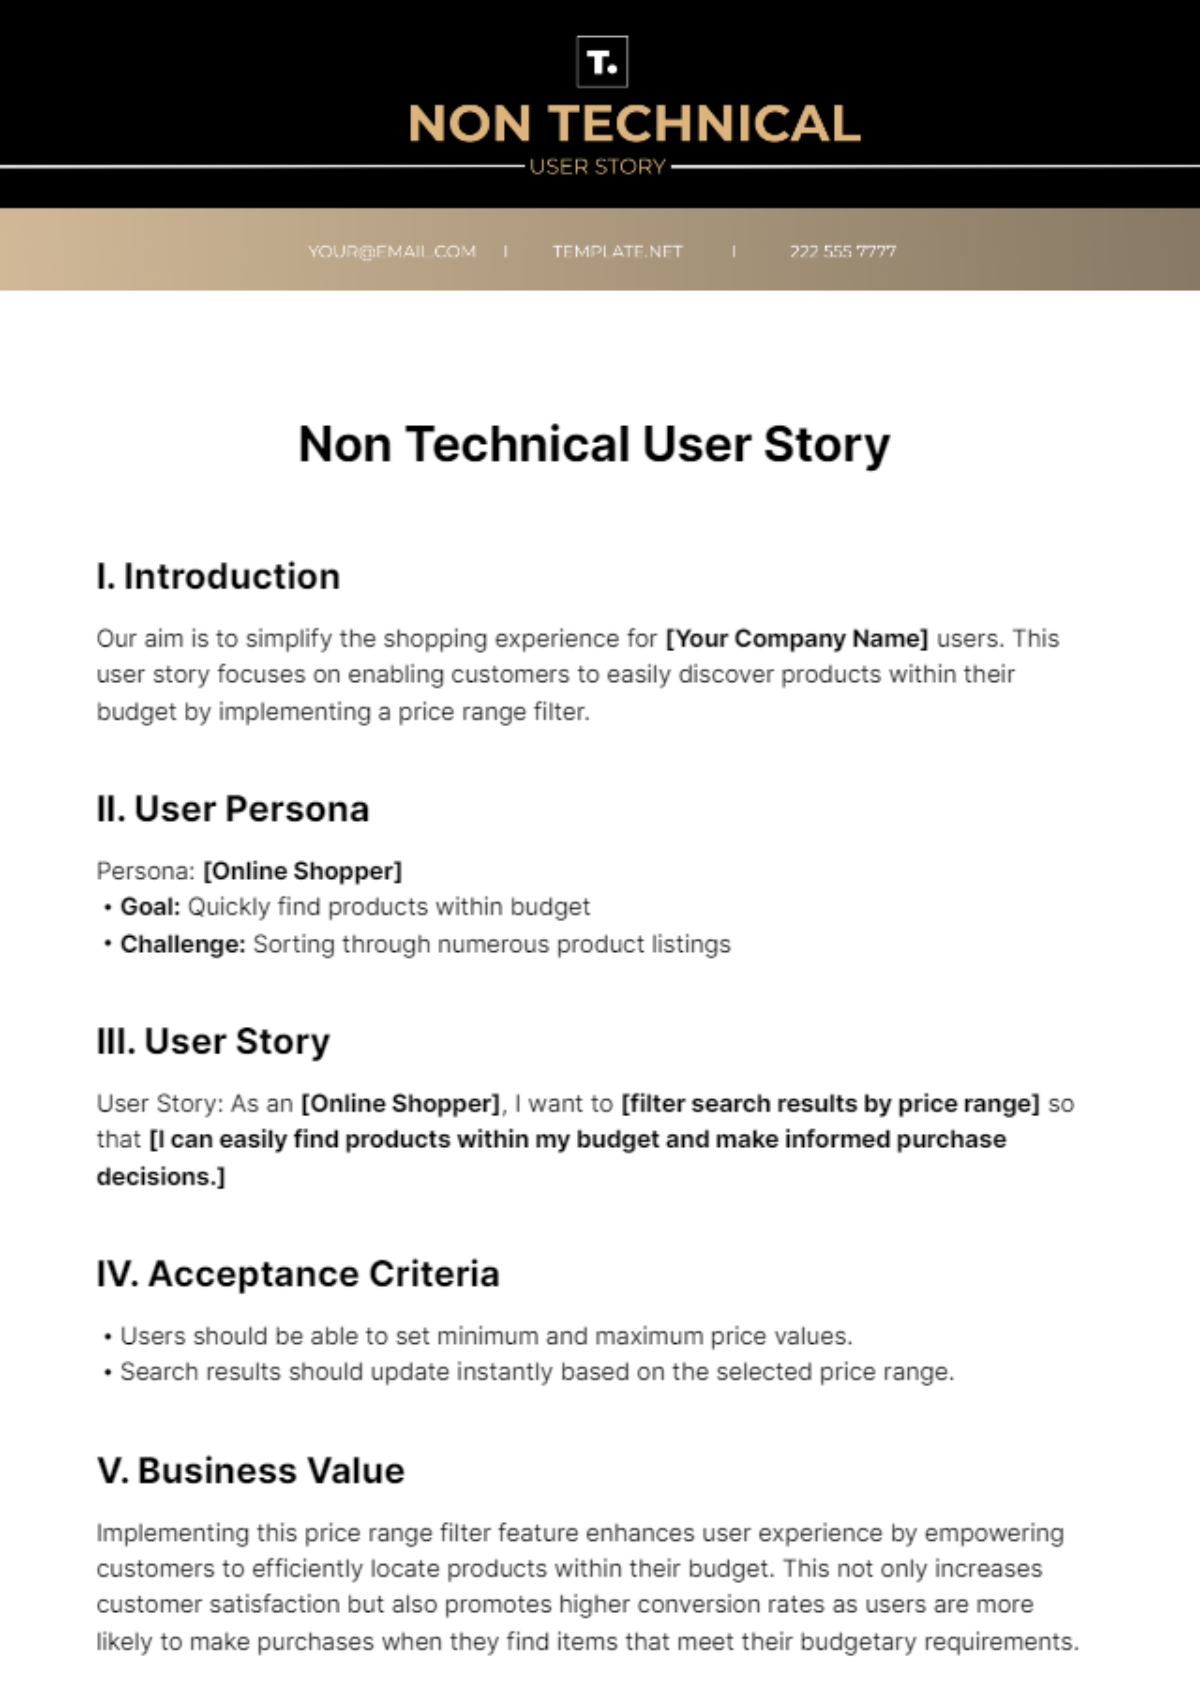 Free Non Technical User Story Template